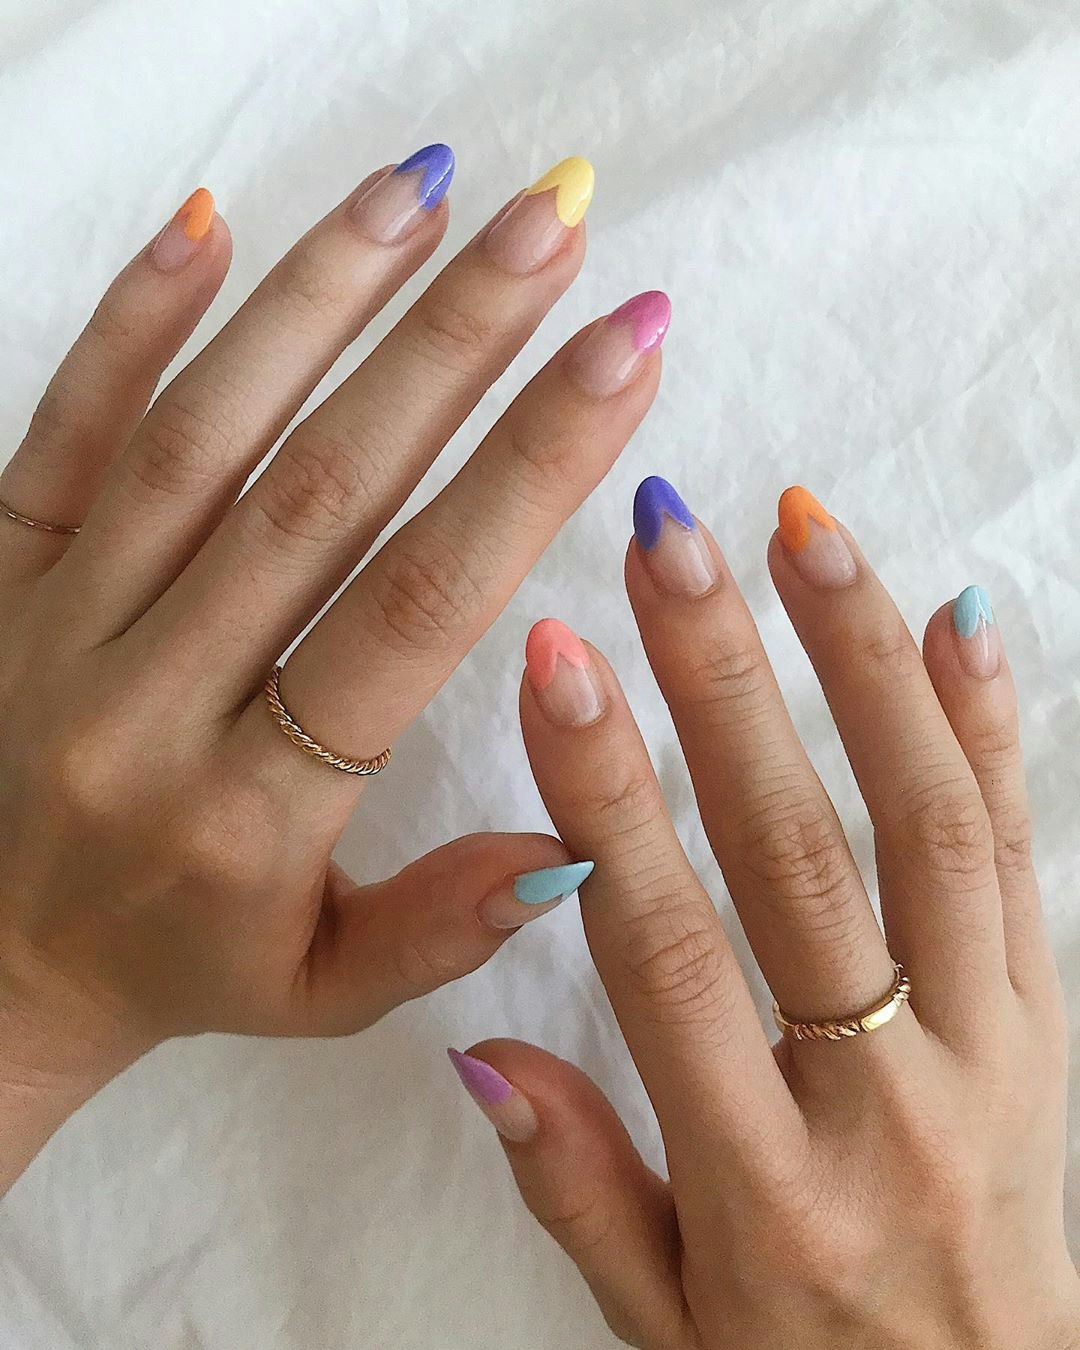 13 spring nail designs to take to your next mani appointment